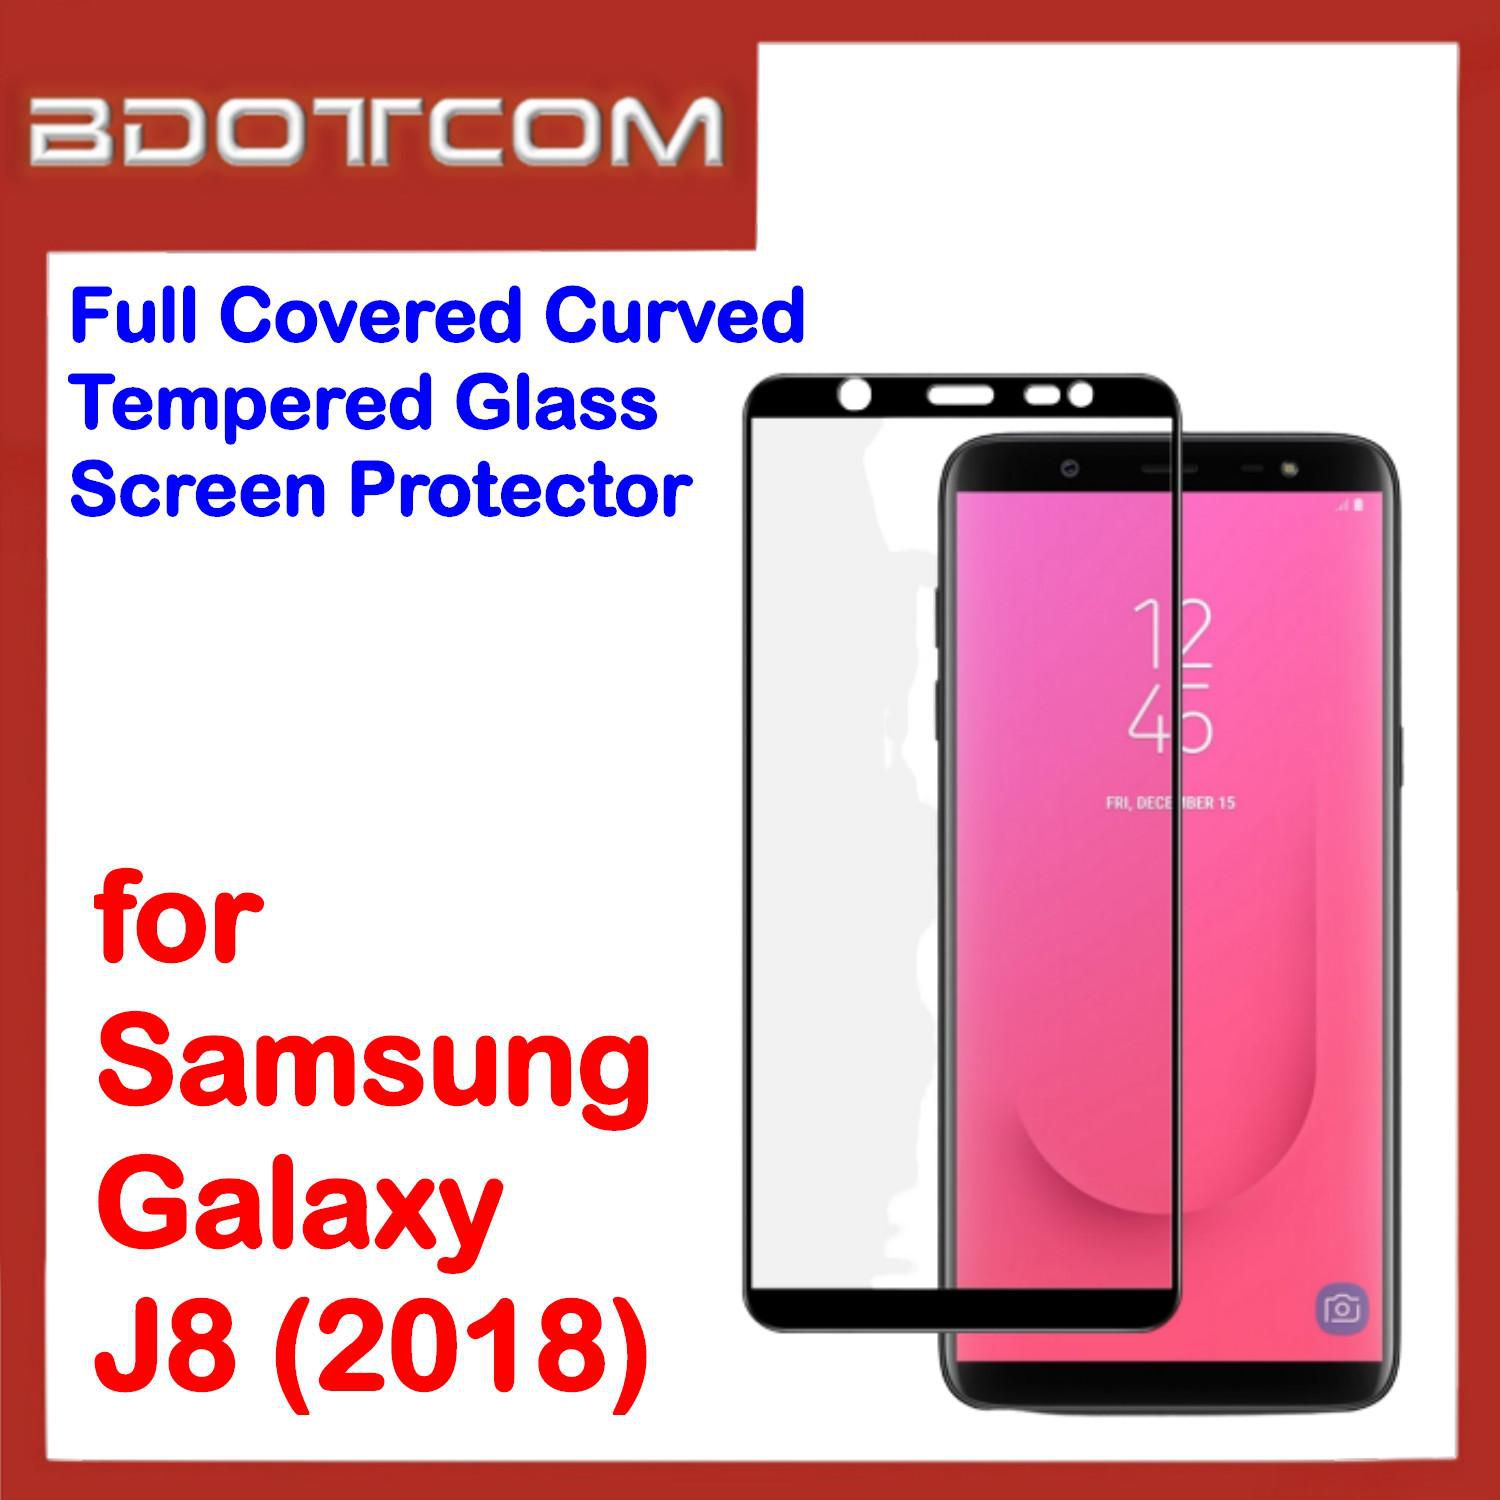 Bdotcom Full Covered Tempered Glass Screen Protector for Samsung J8 2018 (Black)